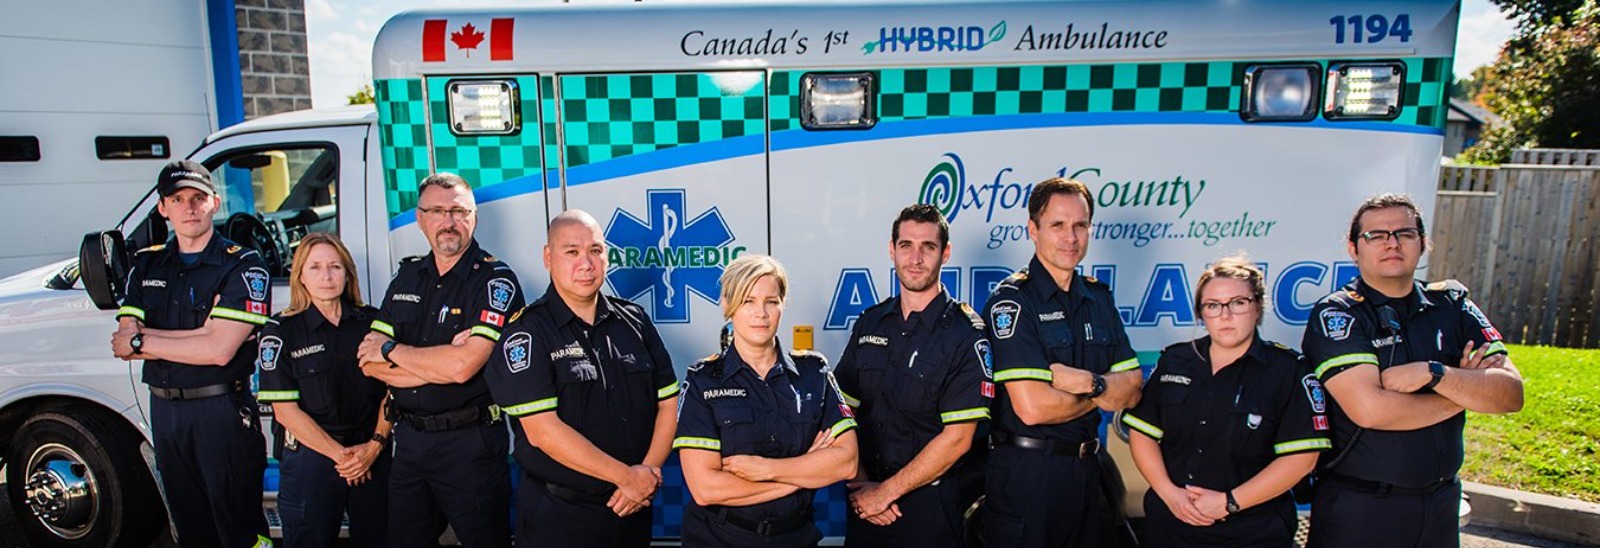 row of paramedic people posing in front of an ambulance